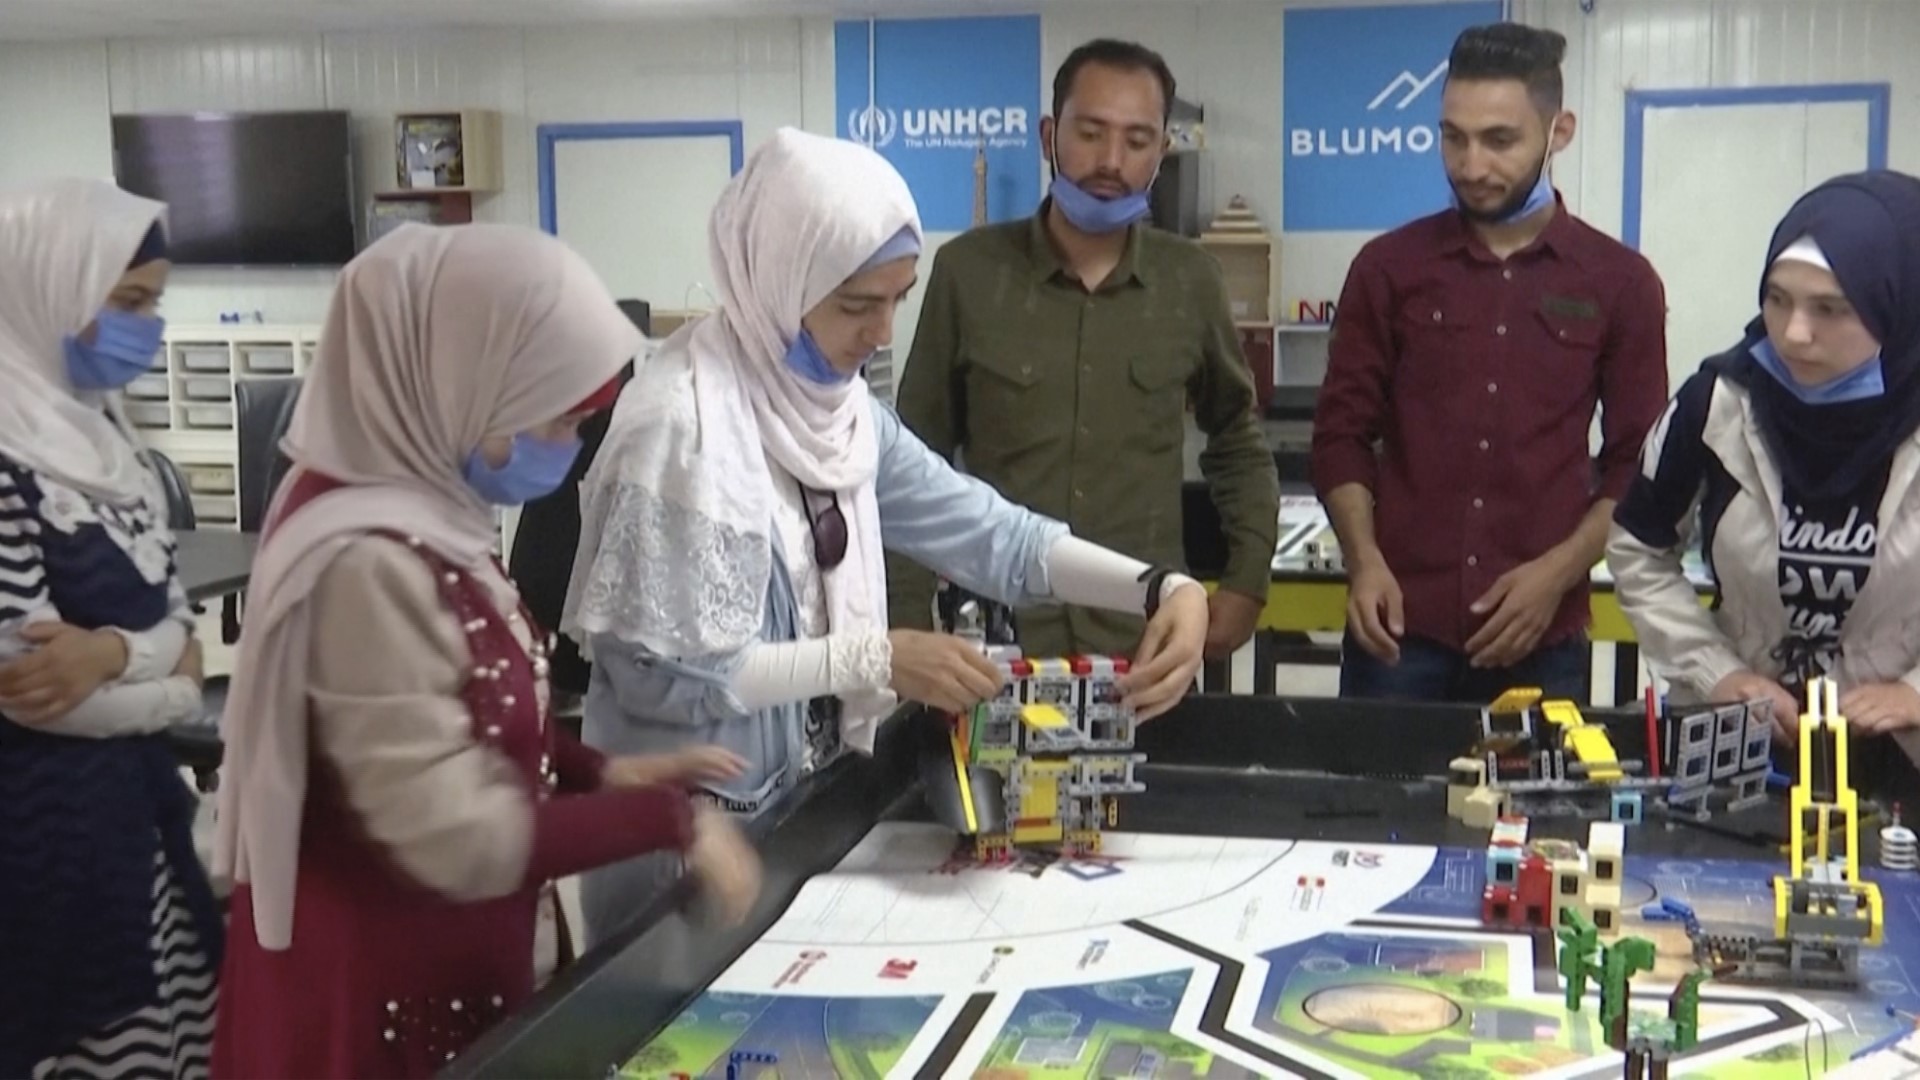 Teenage girls at a refugee camp in Jordan are turning LEGOs into robots.